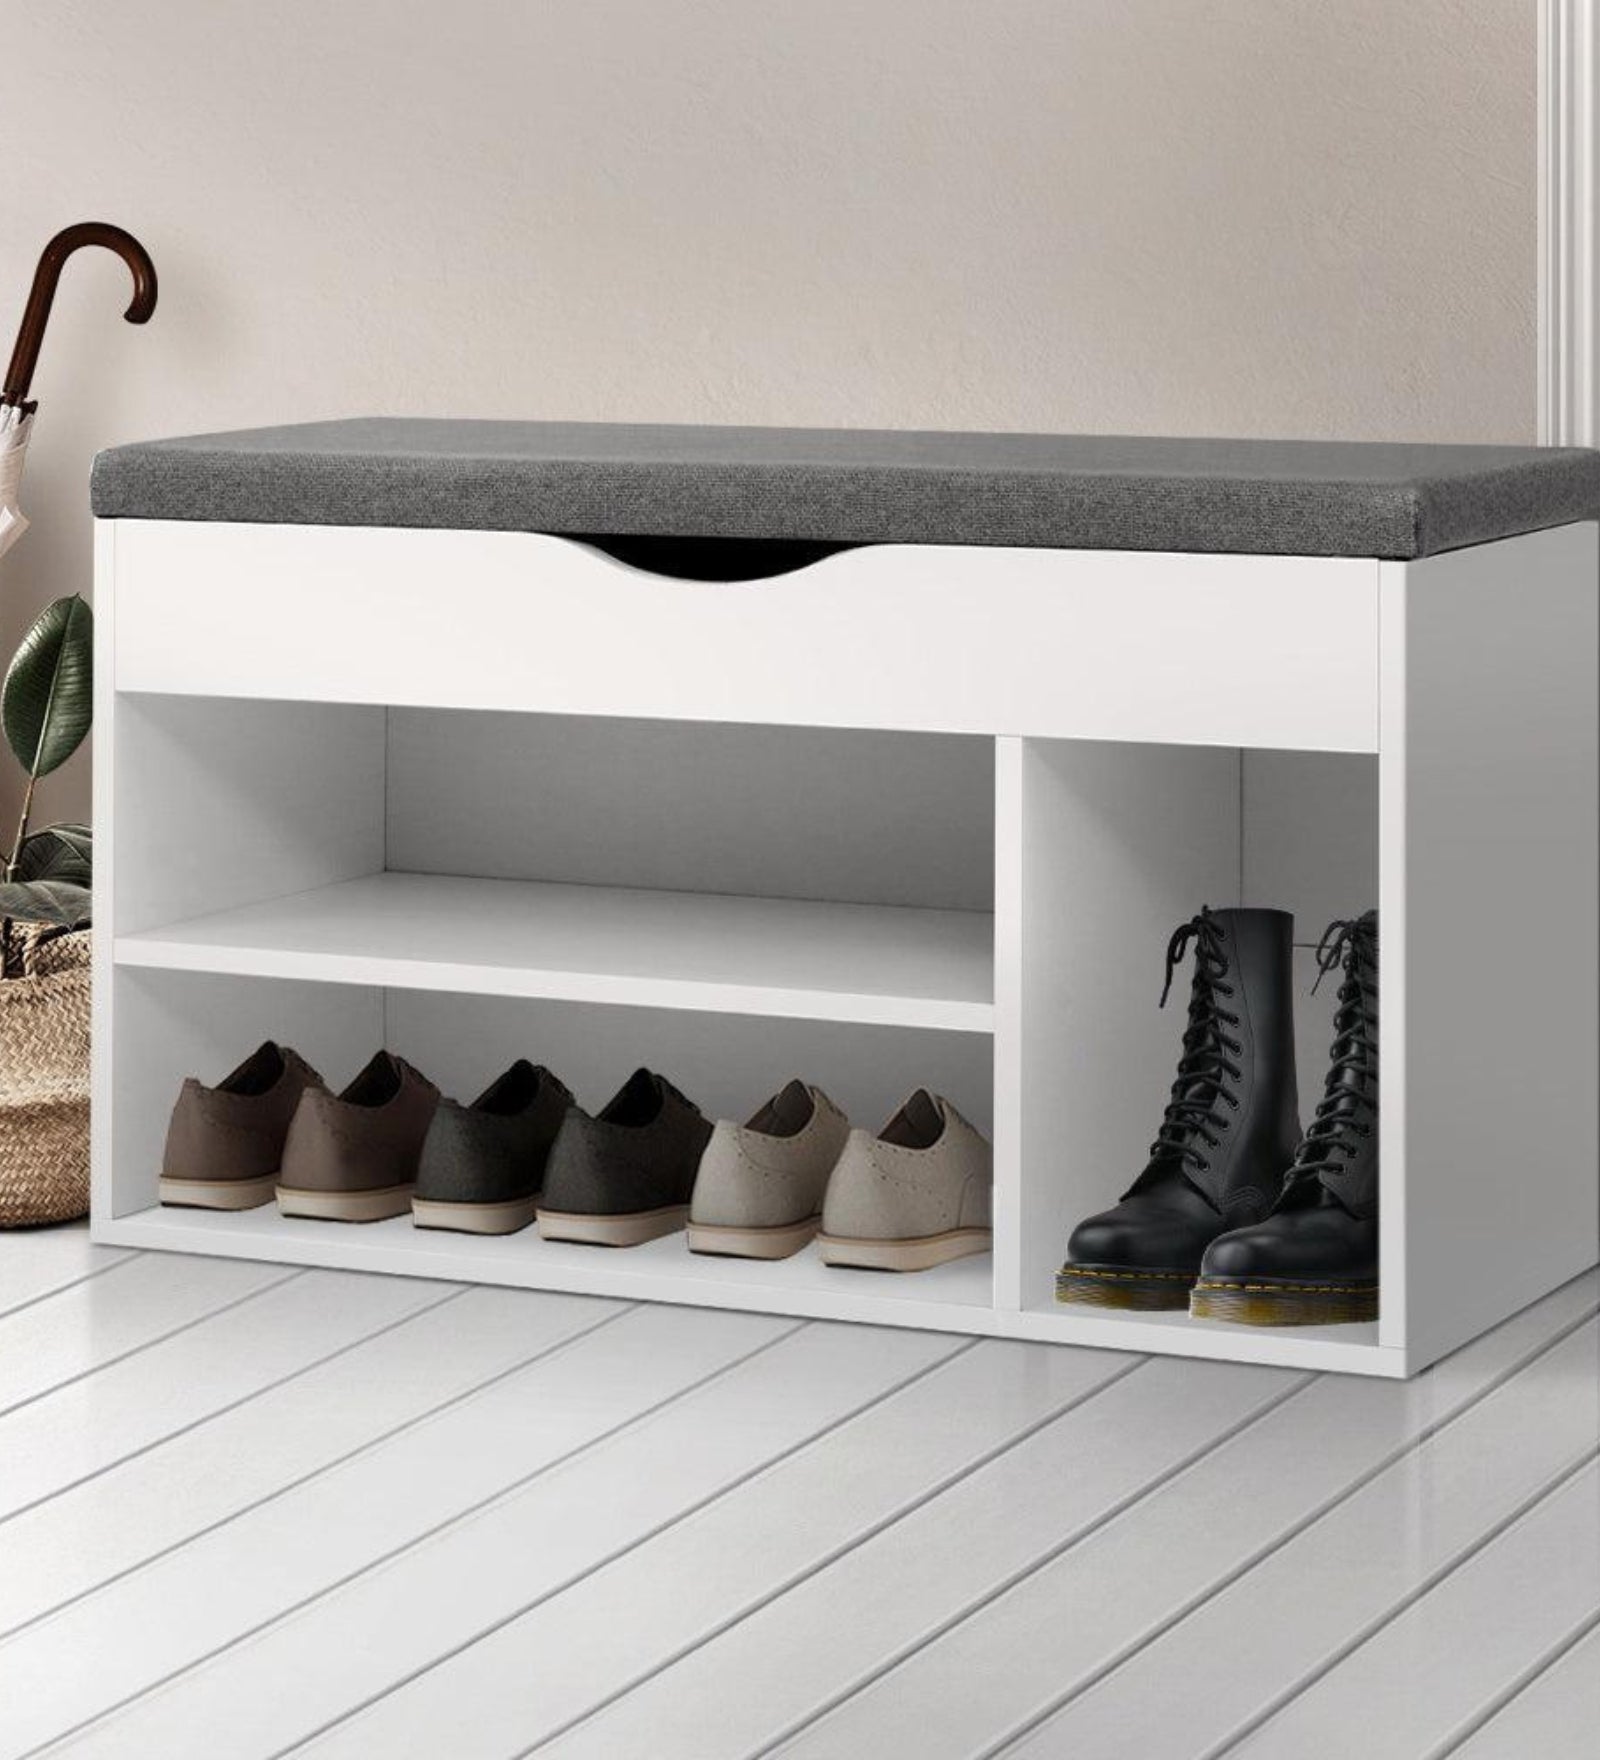 Piper Shoe Rack in Frosty White Finish